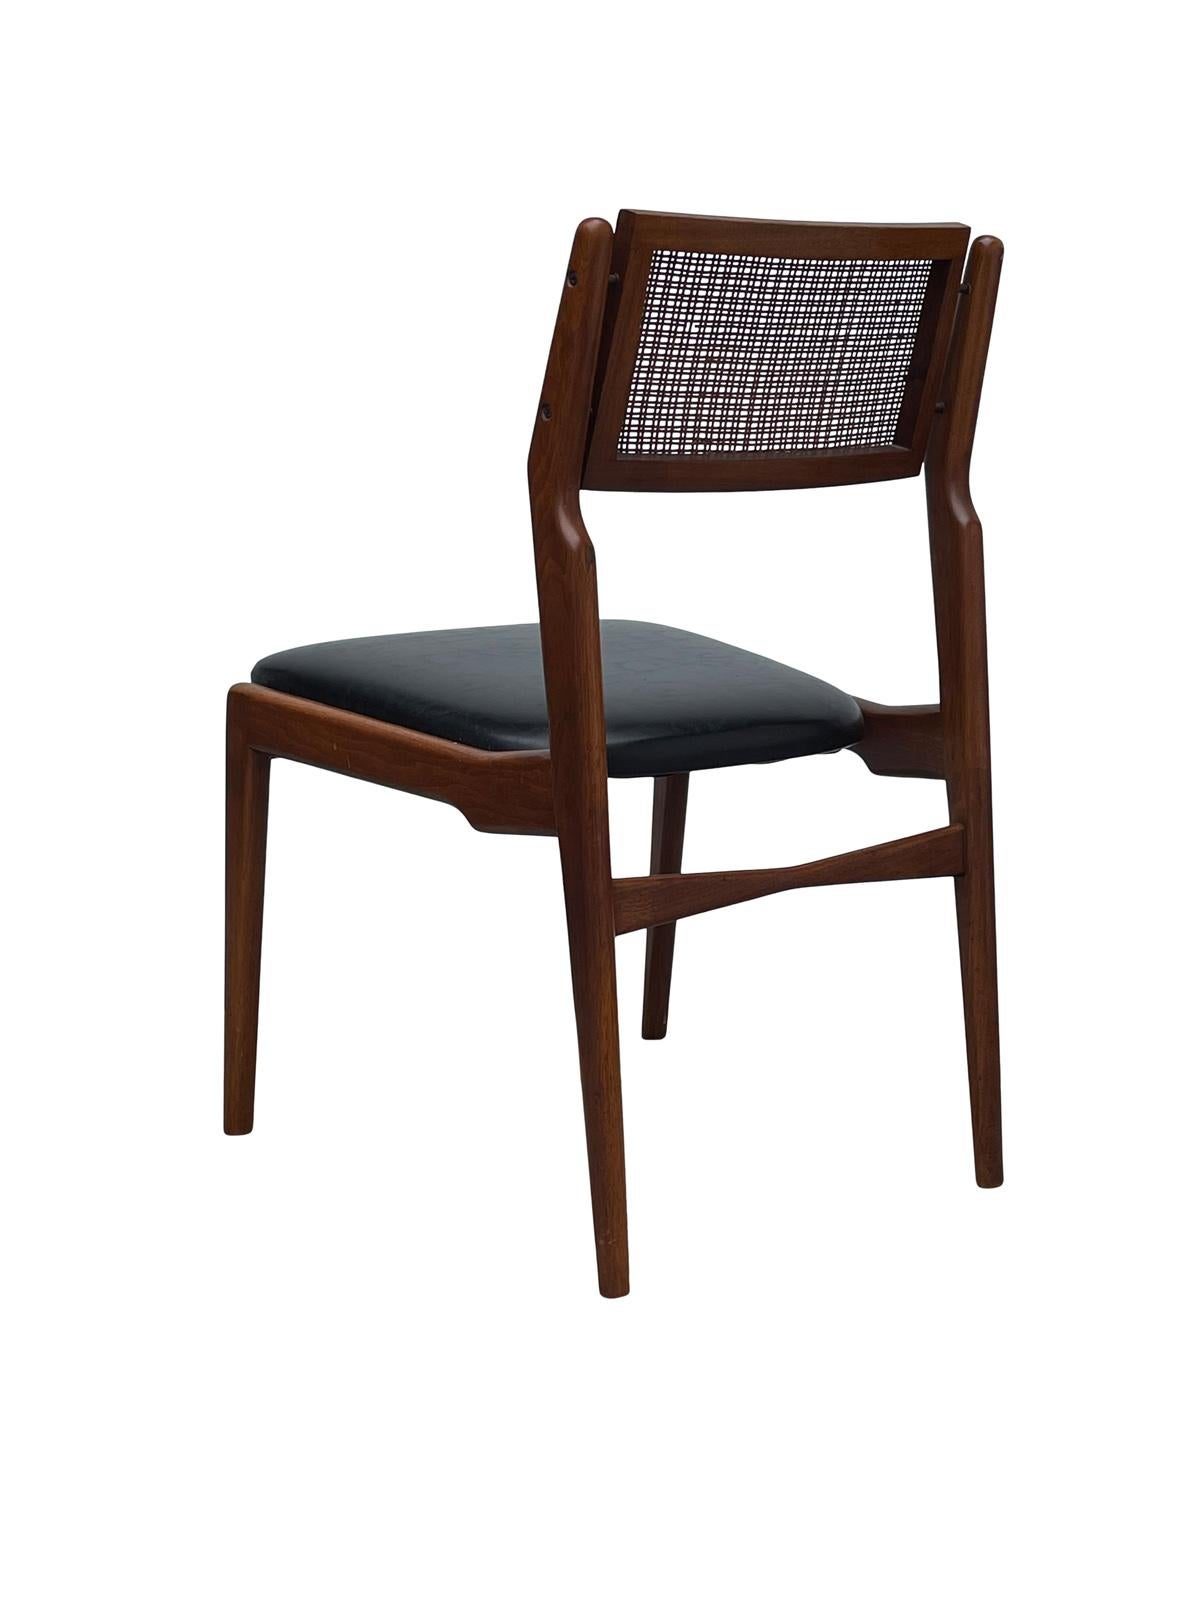 Mid Century Modern Caned Walnut Dining Chairs In Good Condition For Sale In Bensalem, PA